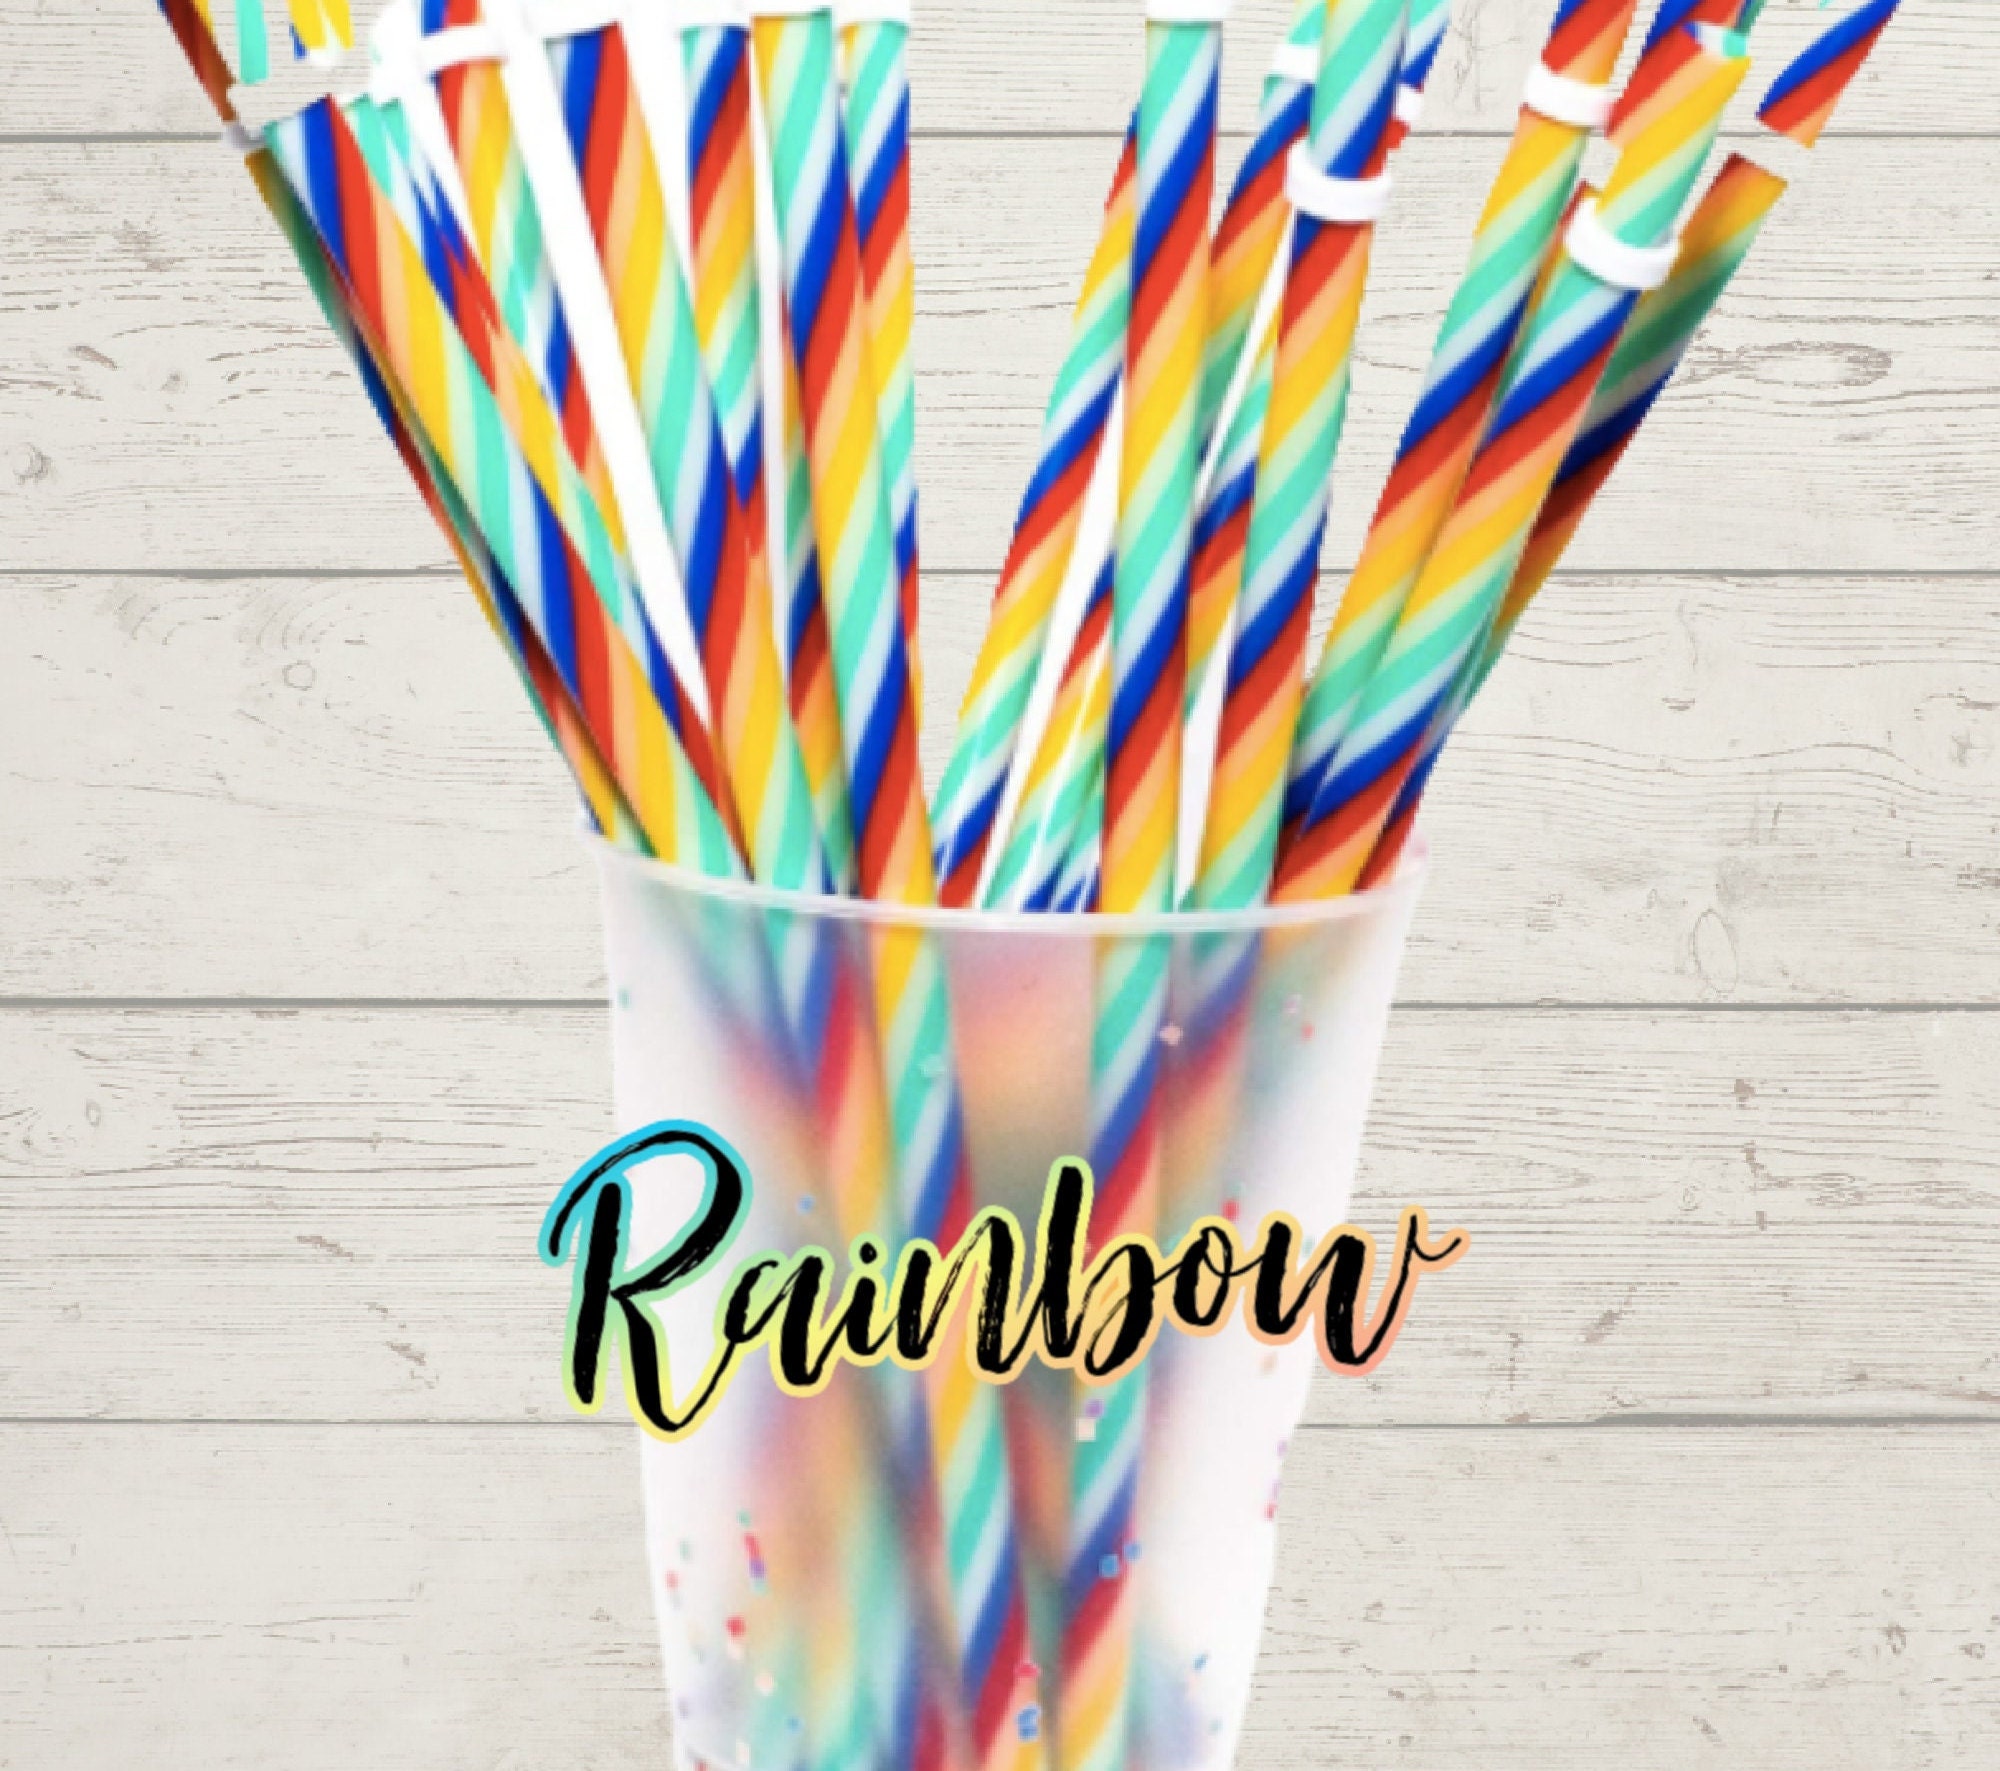 Rainbow Plastic Silly Straws Crazy Reusable Drinking Straws Crazy Straws  For Kids Silly Straws Heart-shaped 